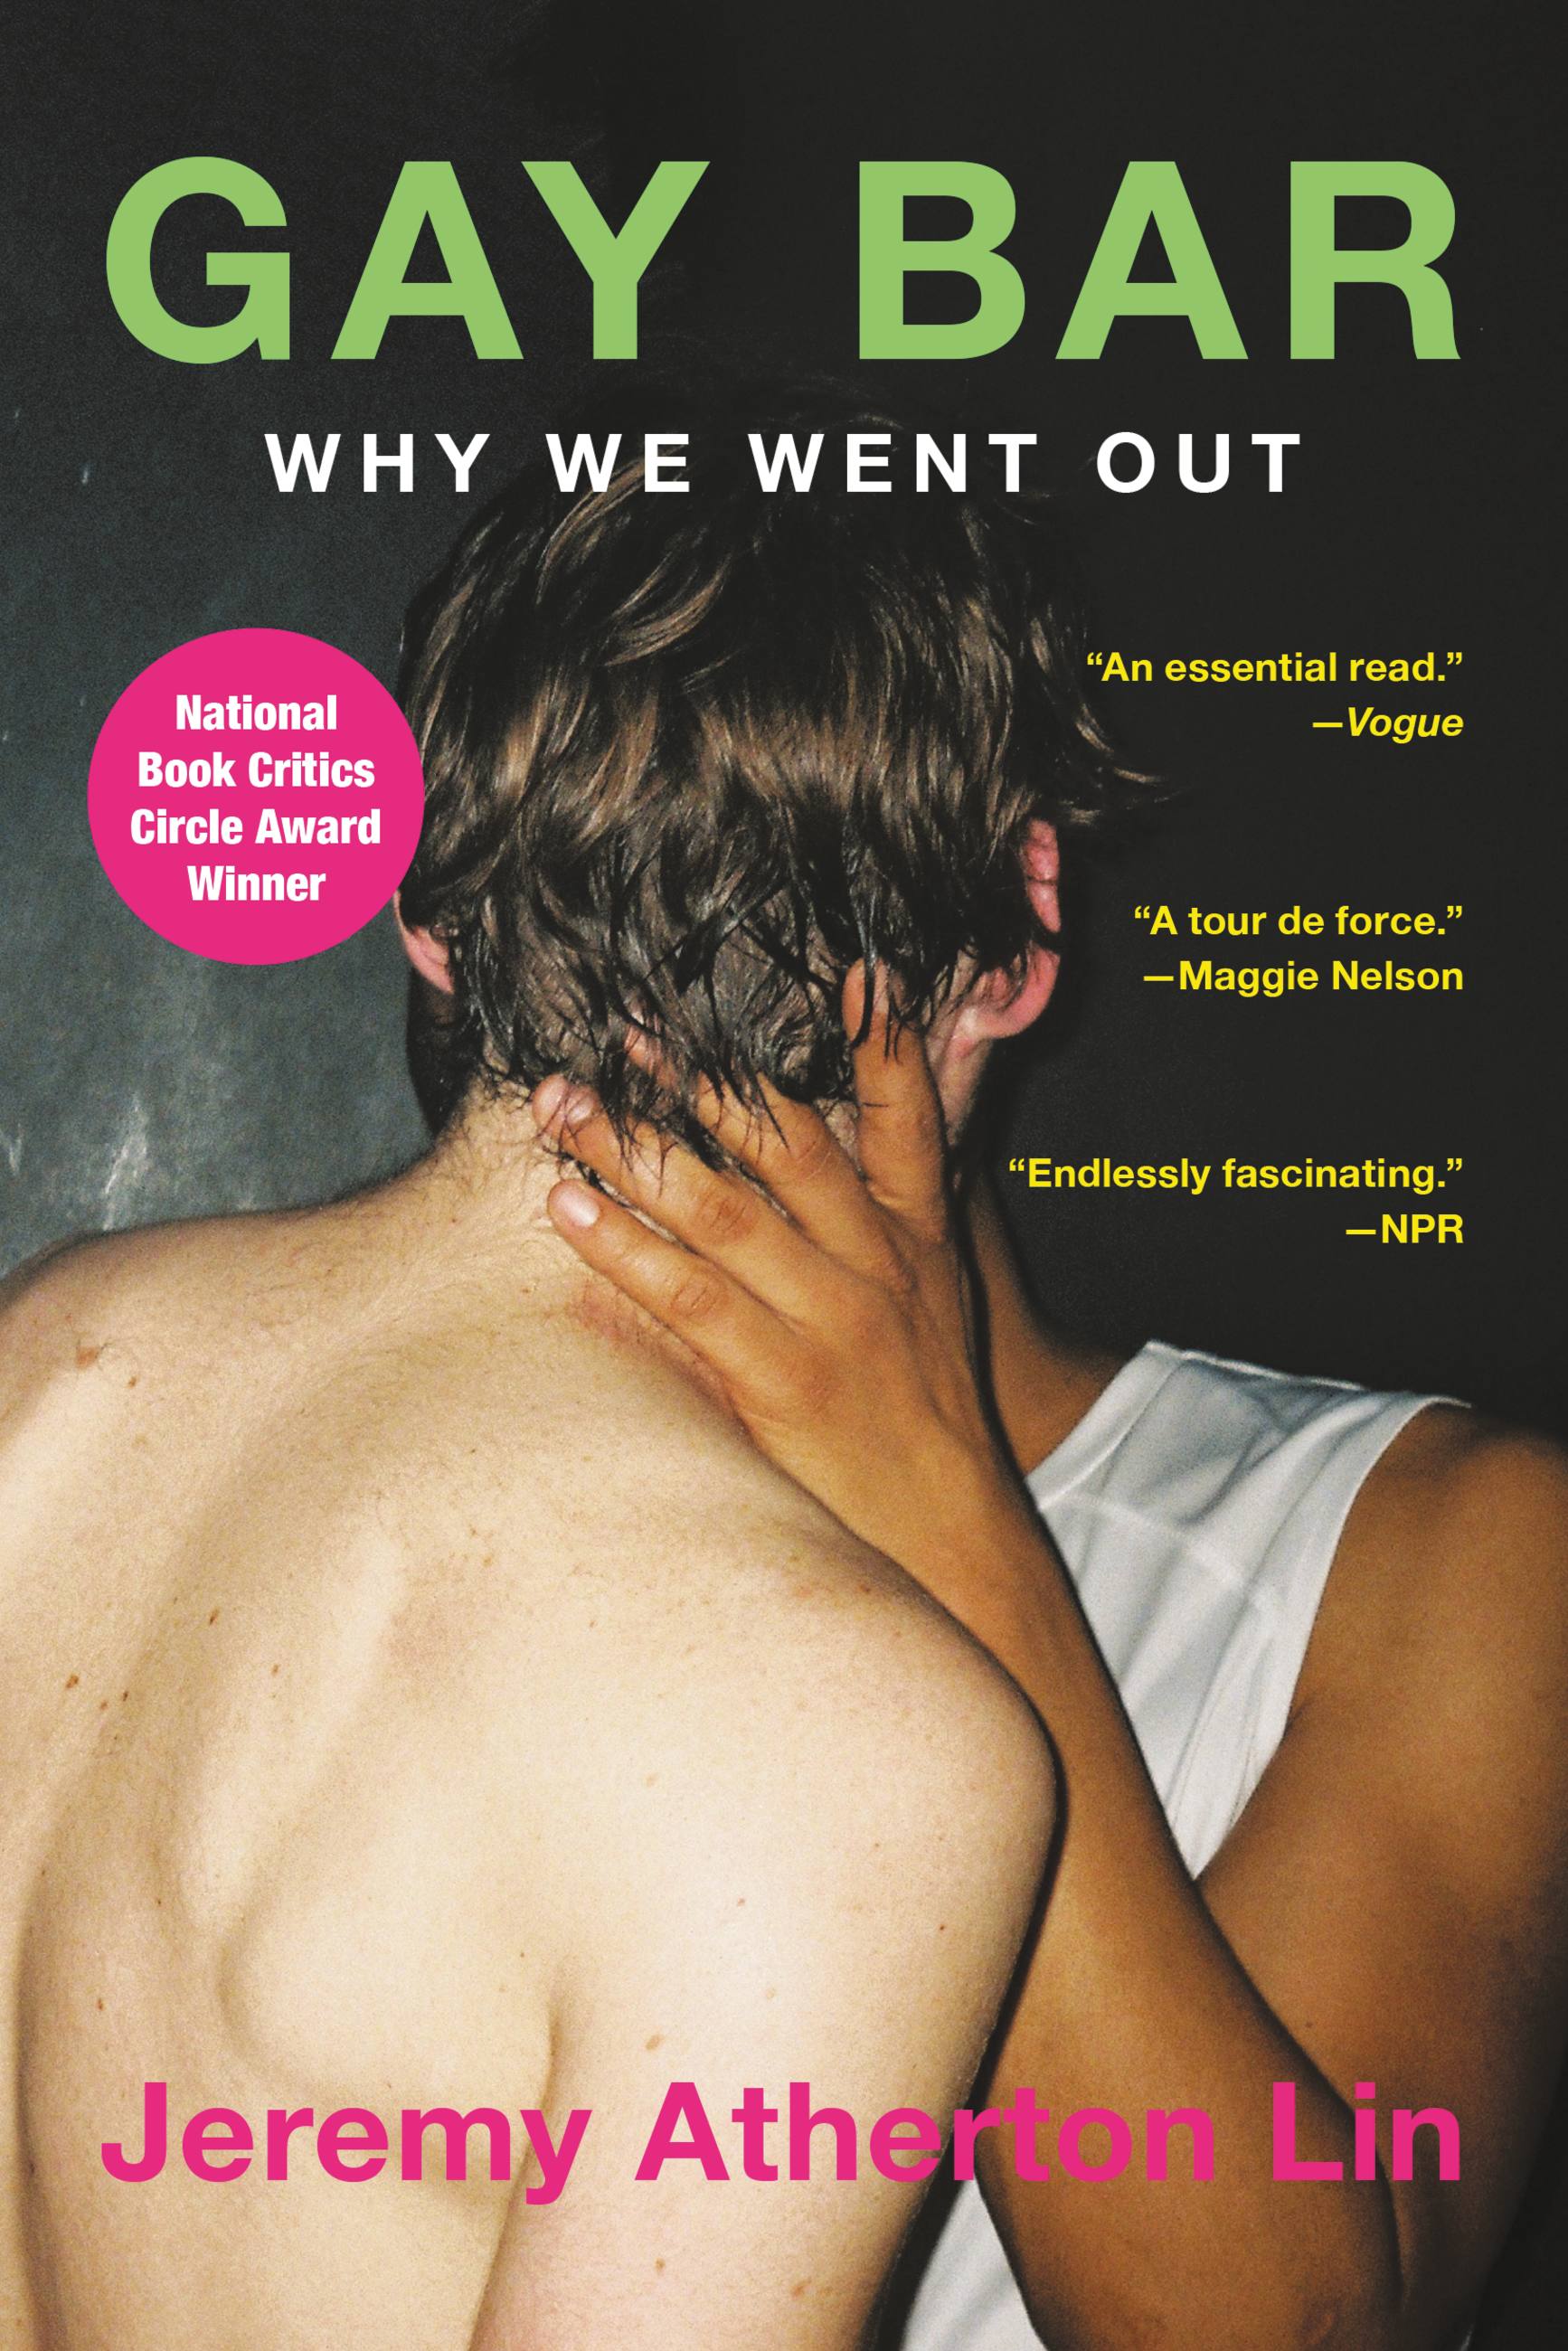 Gay Bar by Jeremy Atherton Lin Hachette Book Group image